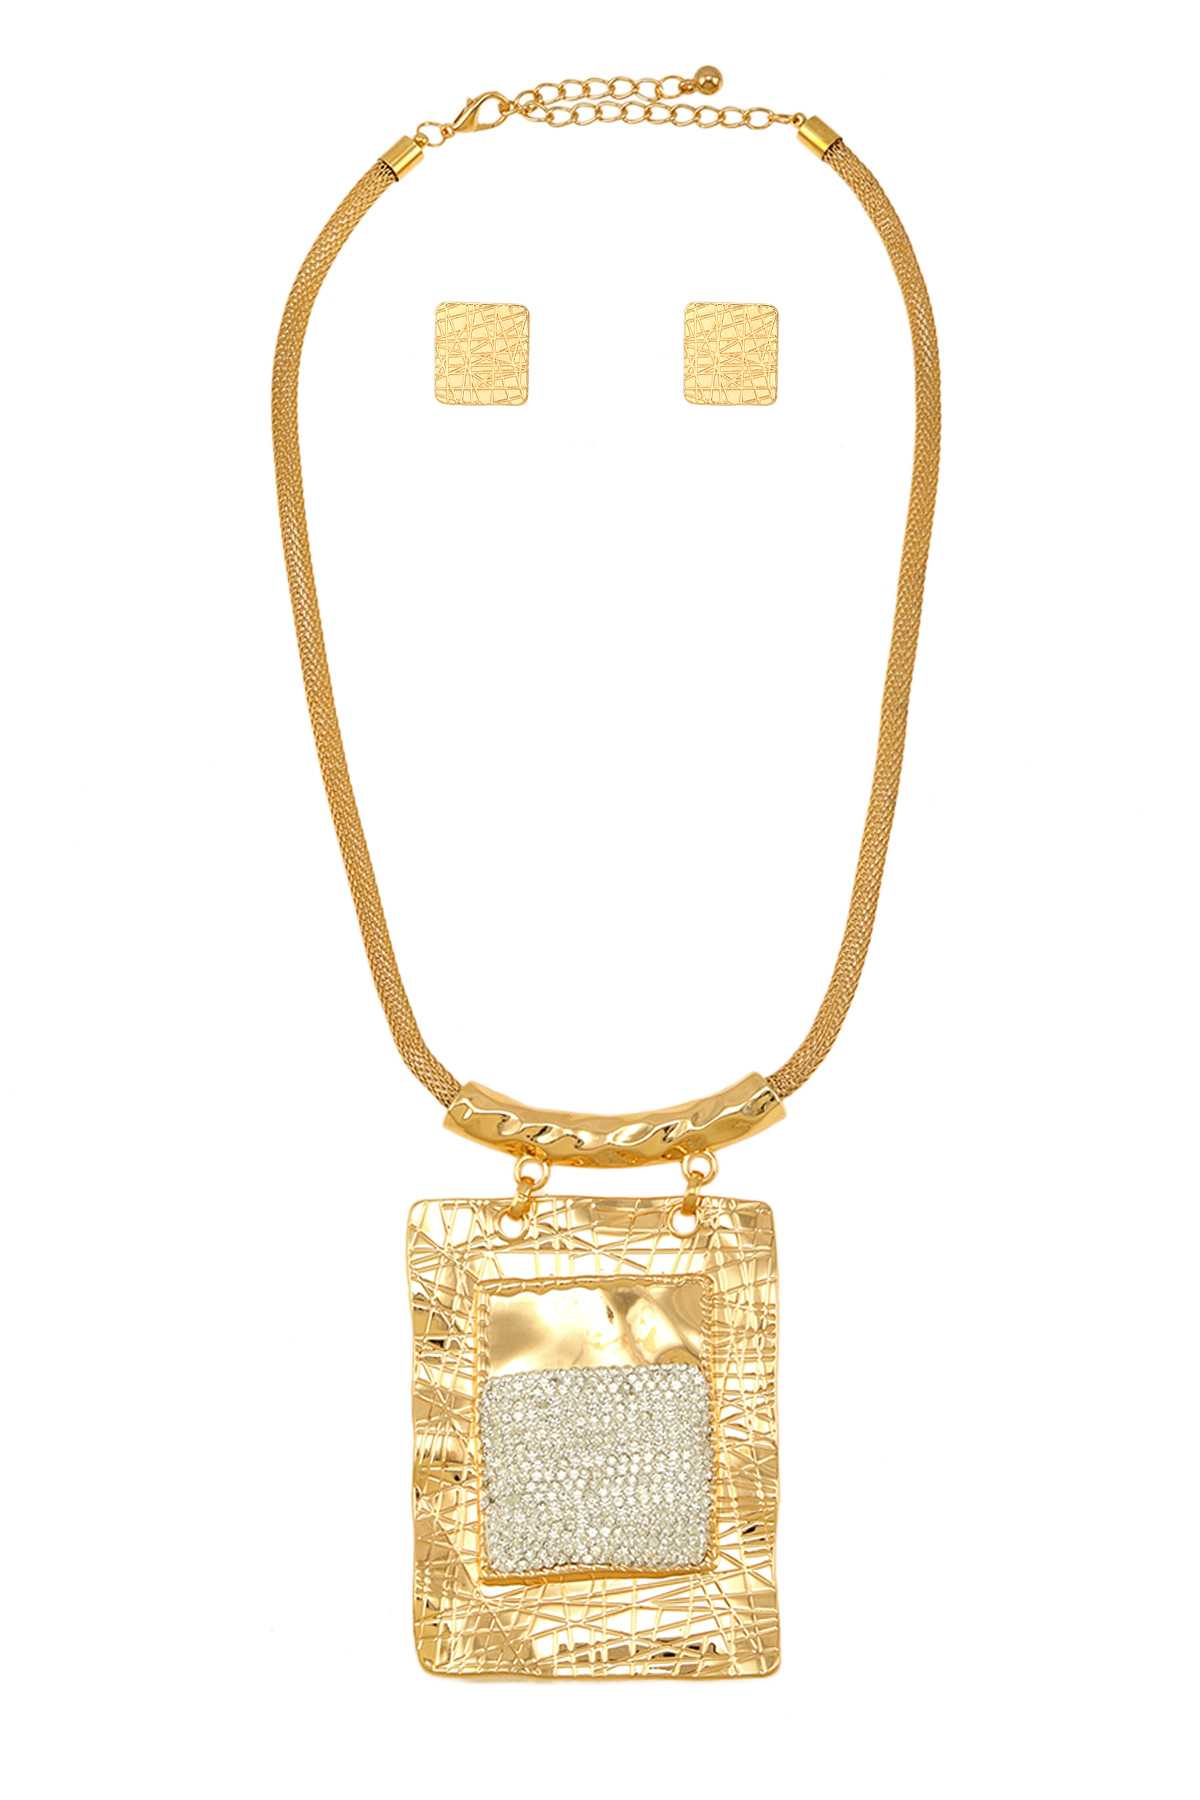 Hammered Metal With Square Pendant Necklace Set